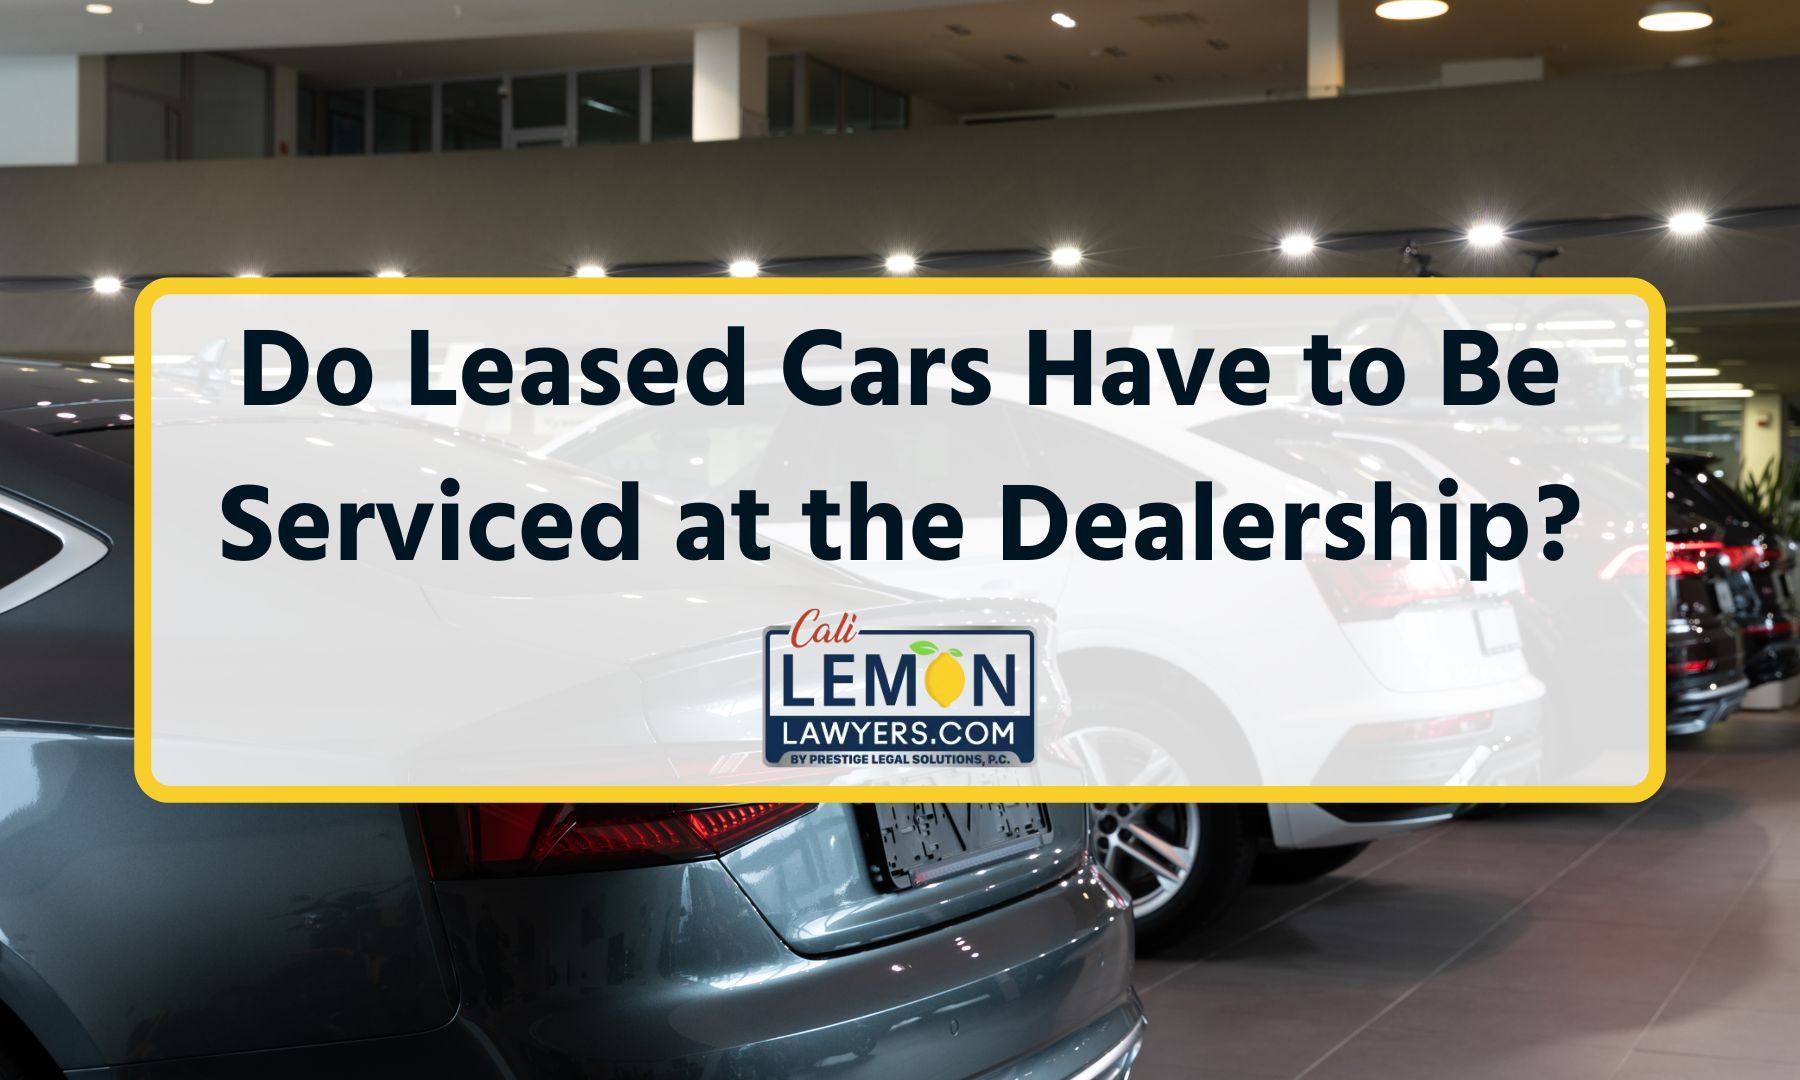 Do Leased Cars Have to Be Serviced at the Dealership?